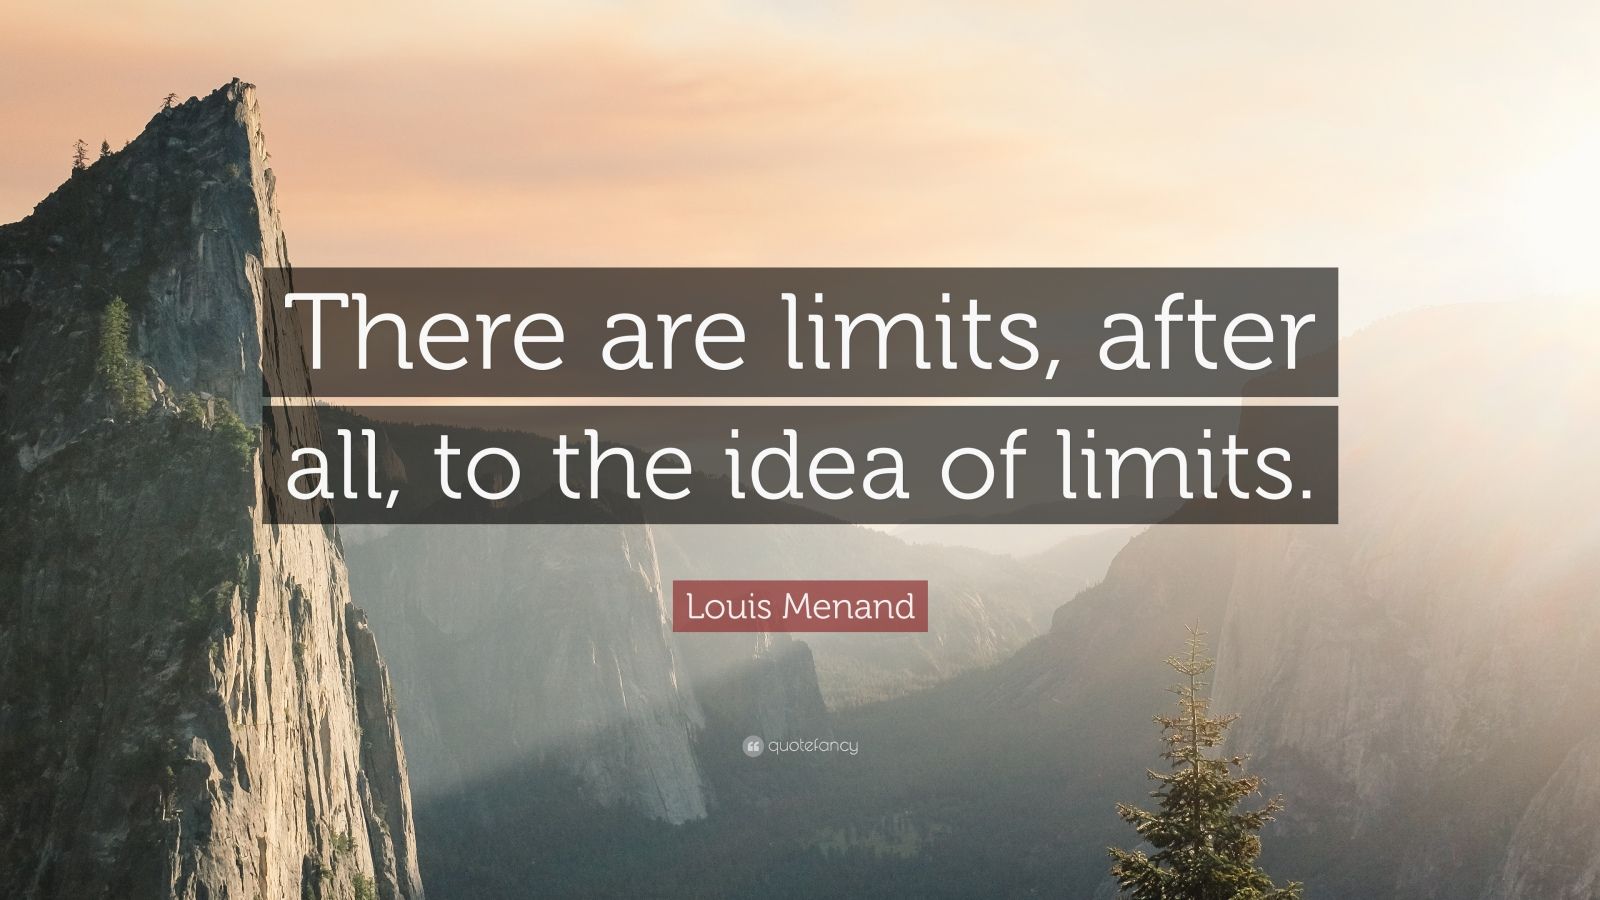 Louis Menand Quotes (35 wallpapers) - Quotefancy